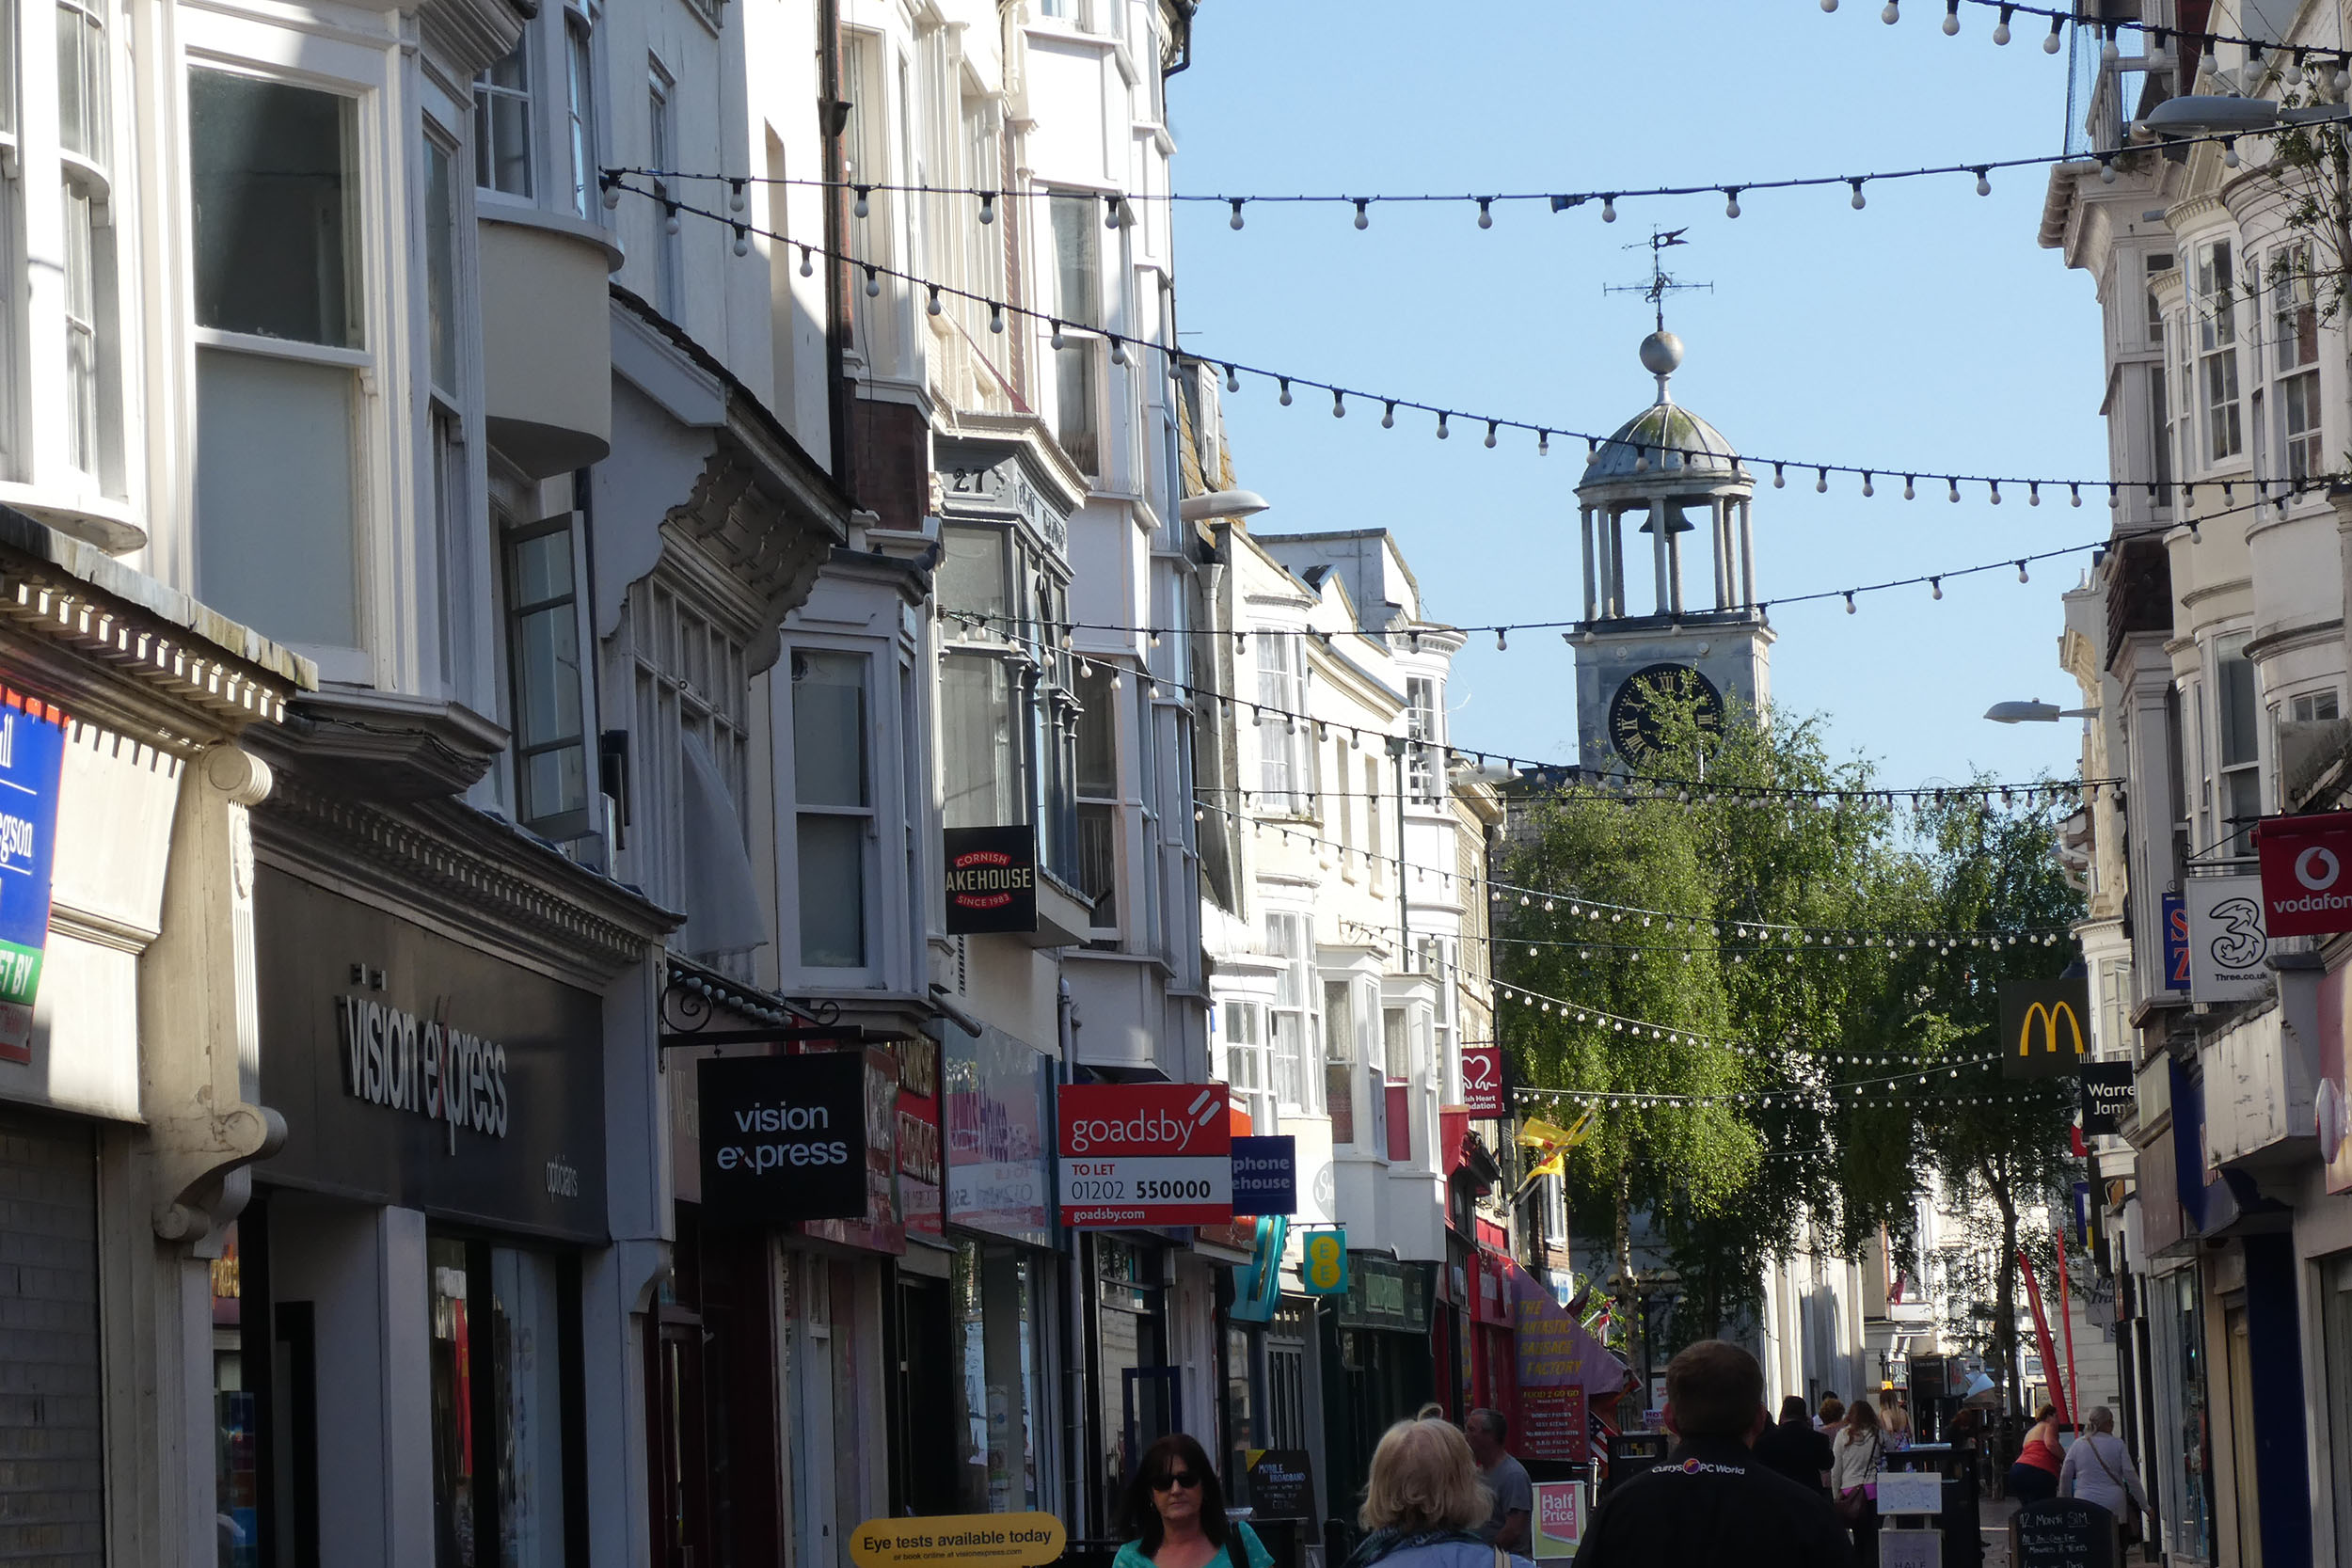 Image of a shopping street in Weymouth showing shops and to let signs.